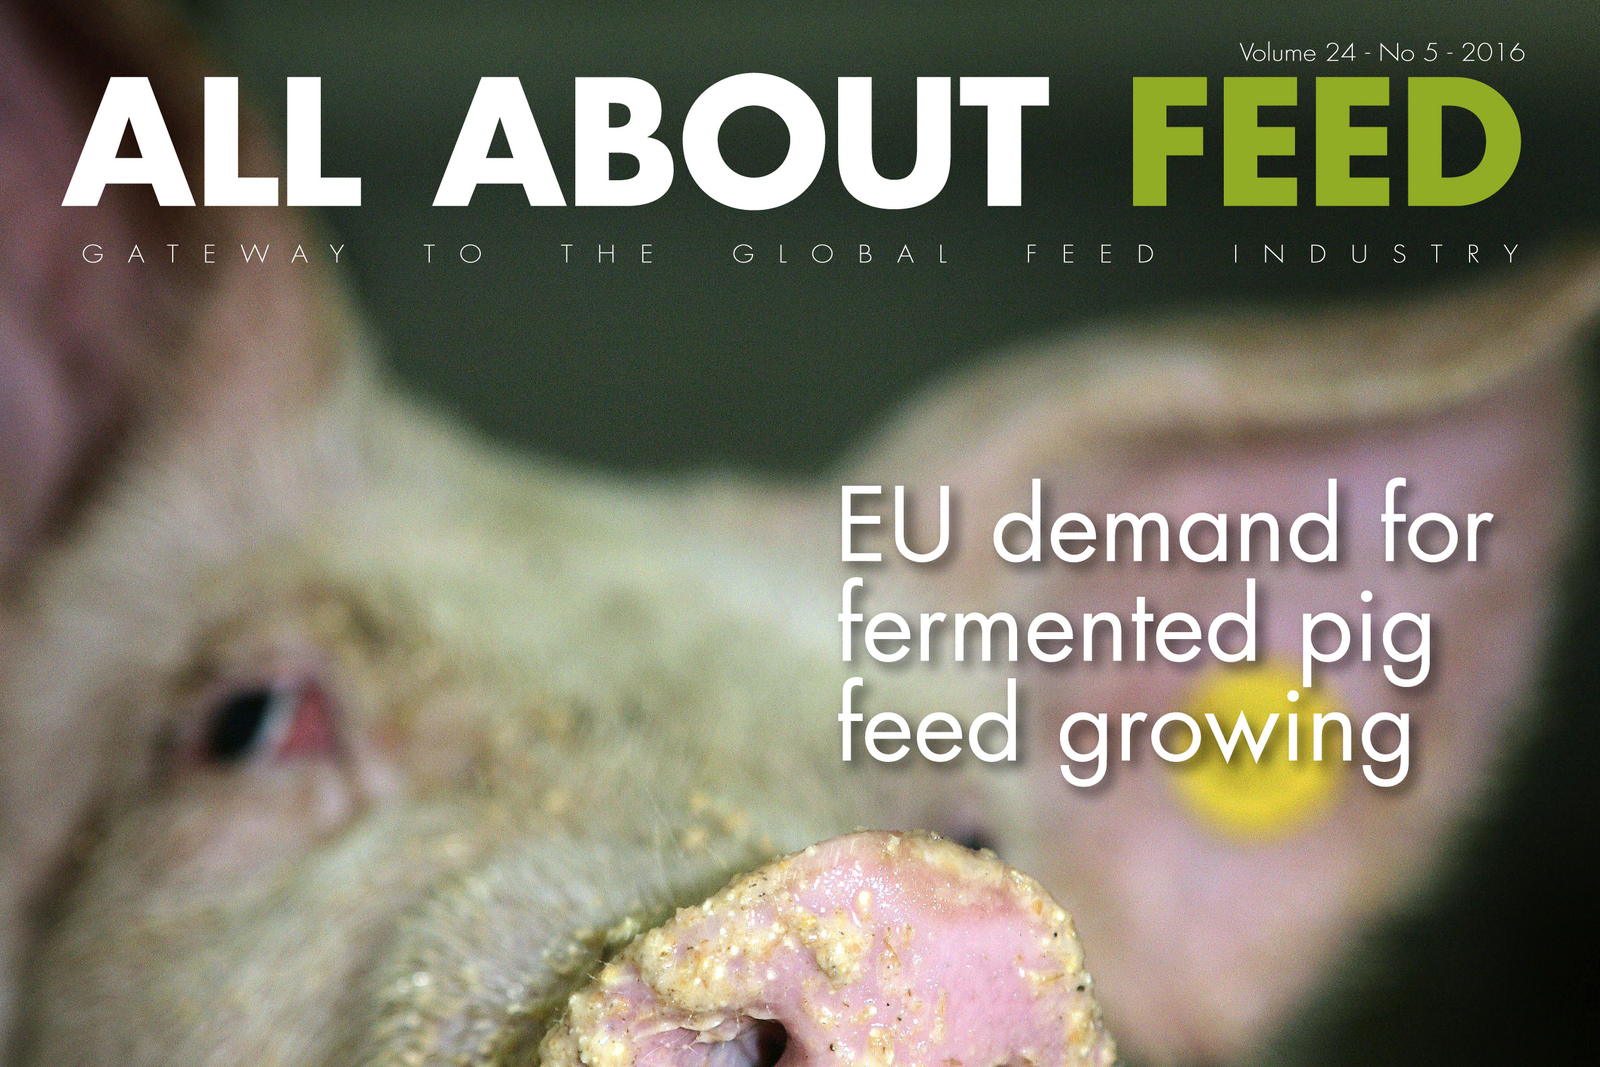 All About Feed June issue now available